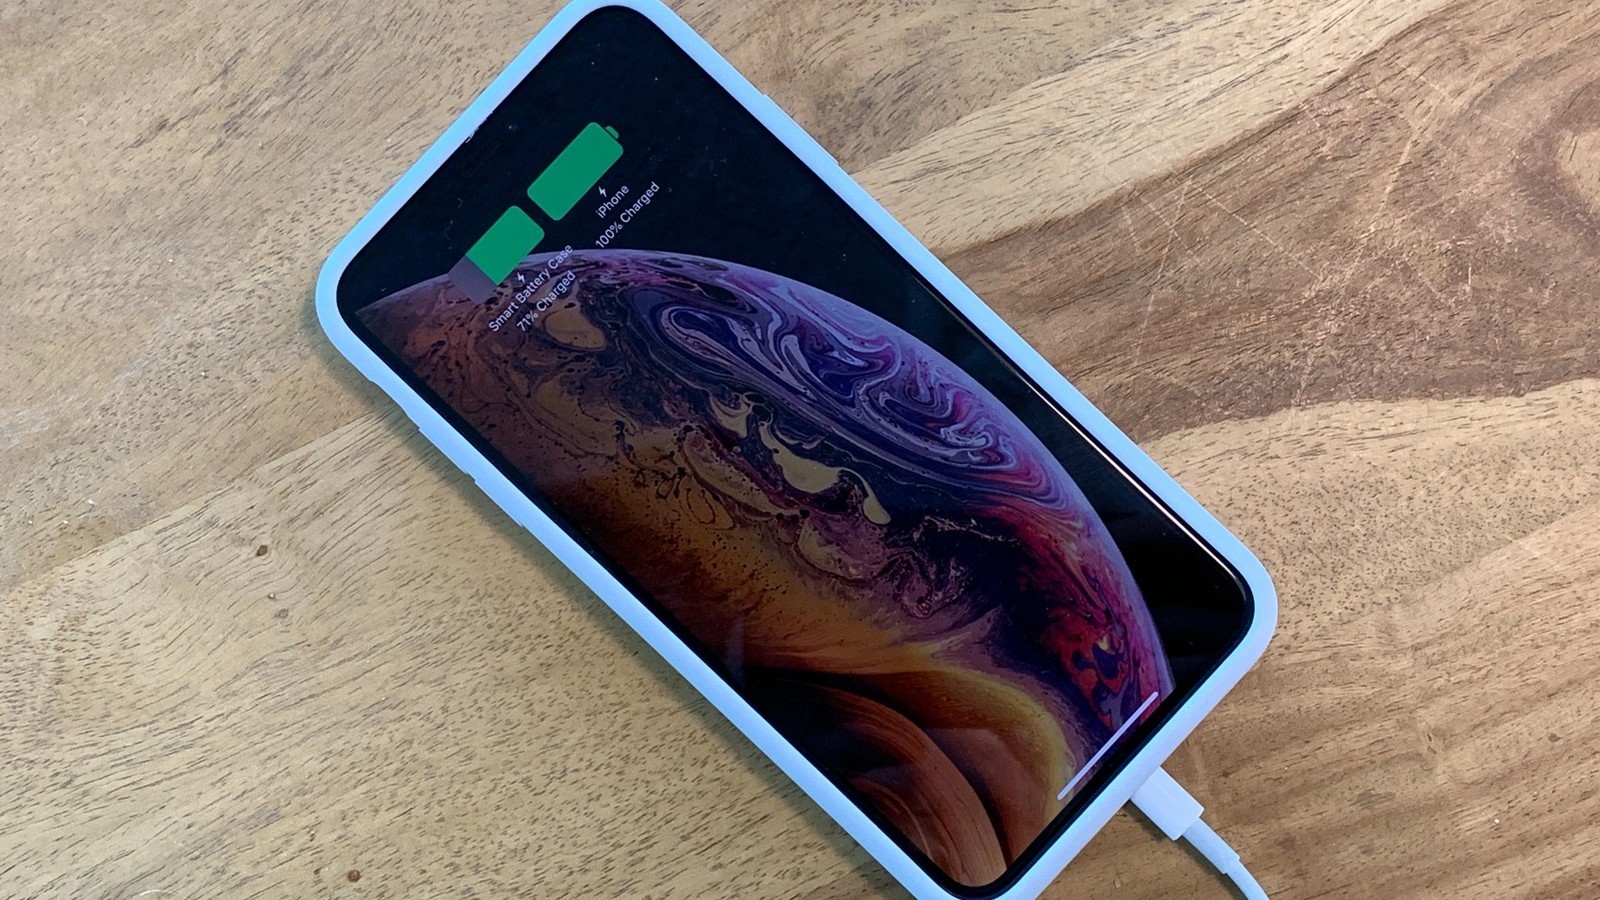 Yes, The Smart Battery Case For Iphone Xs, Iphone Xs - Iphone Xs Max Smart Battery Case , HD Wallpaper & Backgrounds